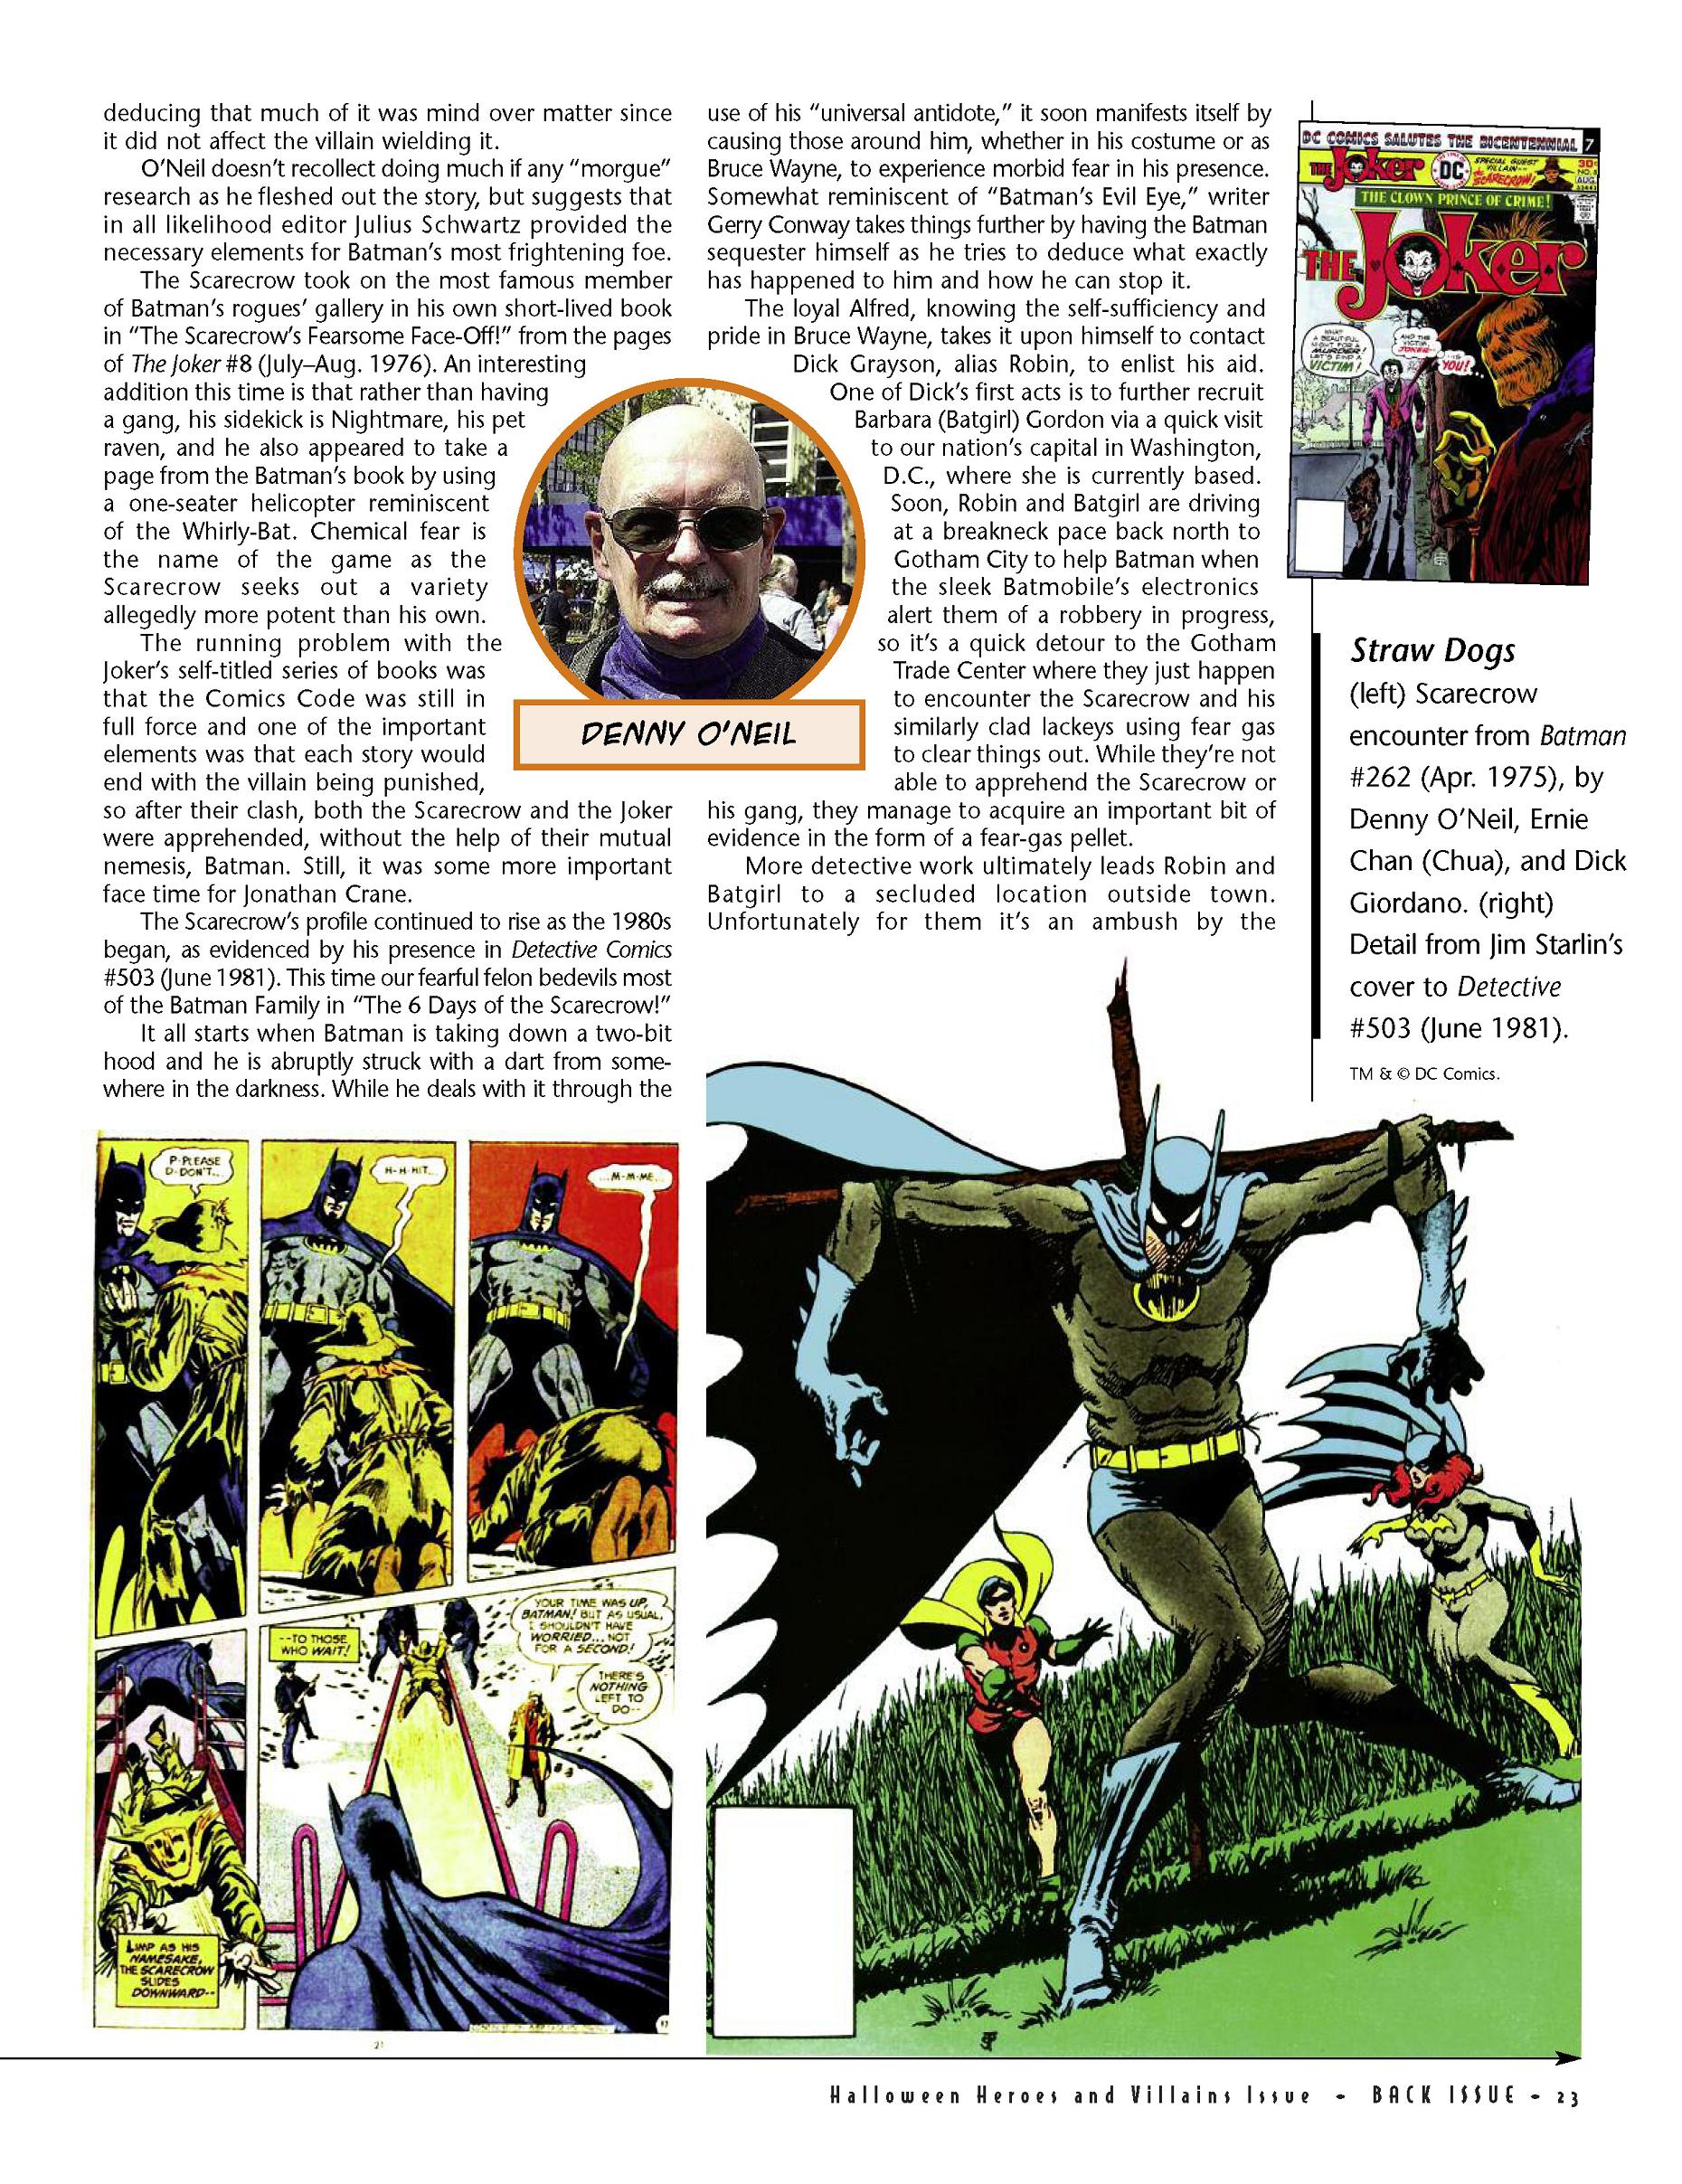 Read online Back Issue comic -  Issue #60 - 24